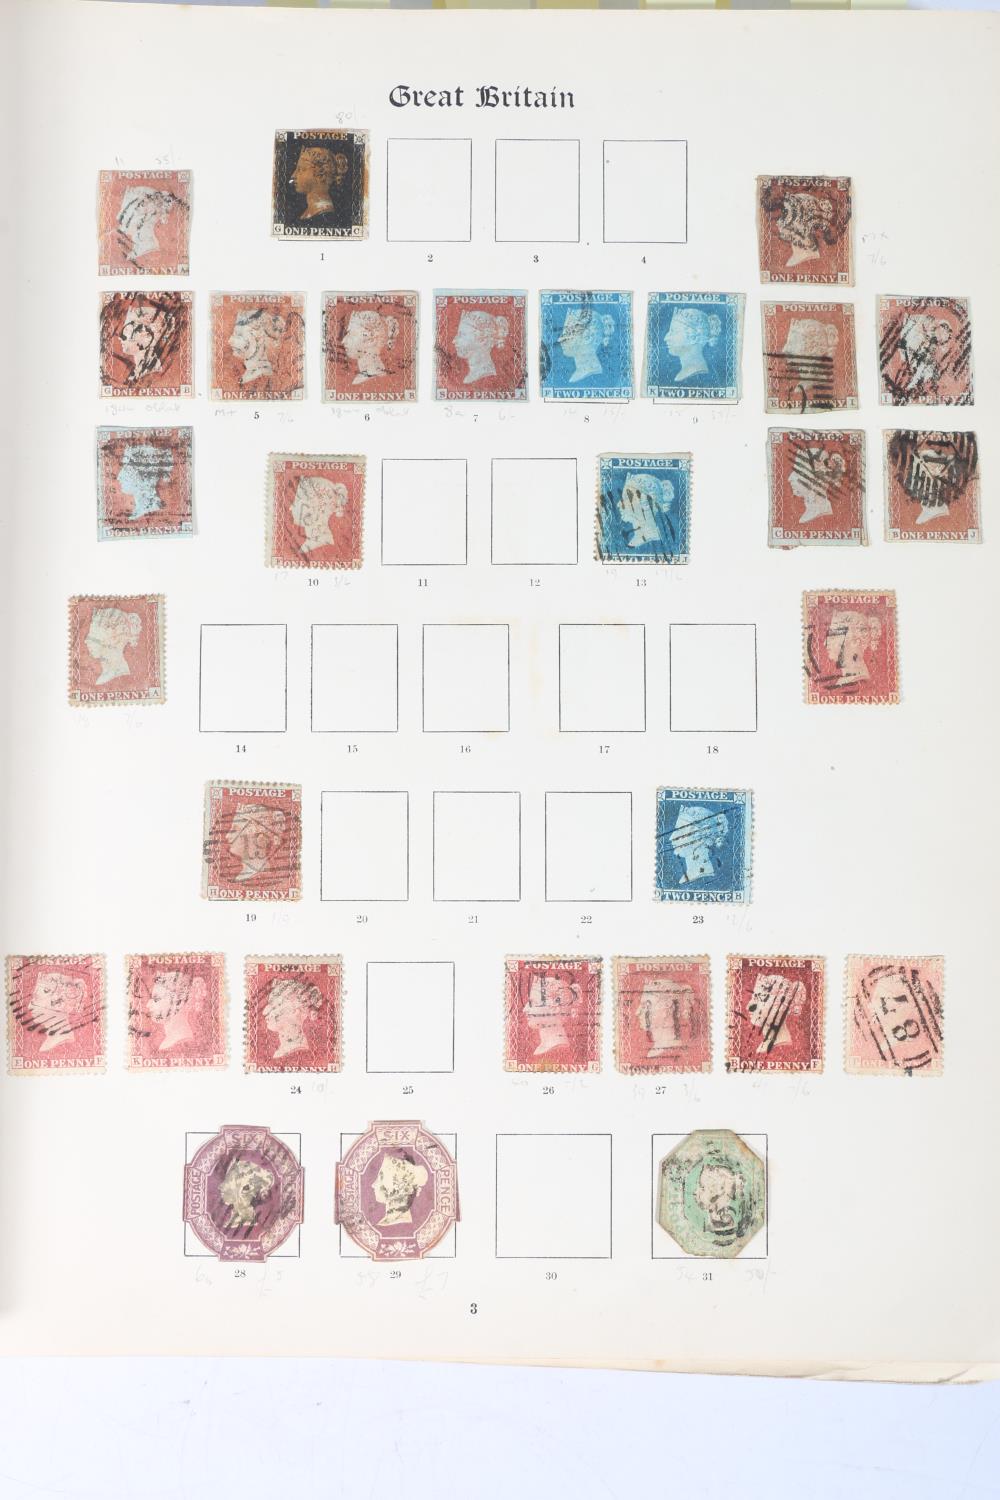 GB stamp collection from QV 1840 onwards to include QV 1d penny black, embossed issues 1s green SG54